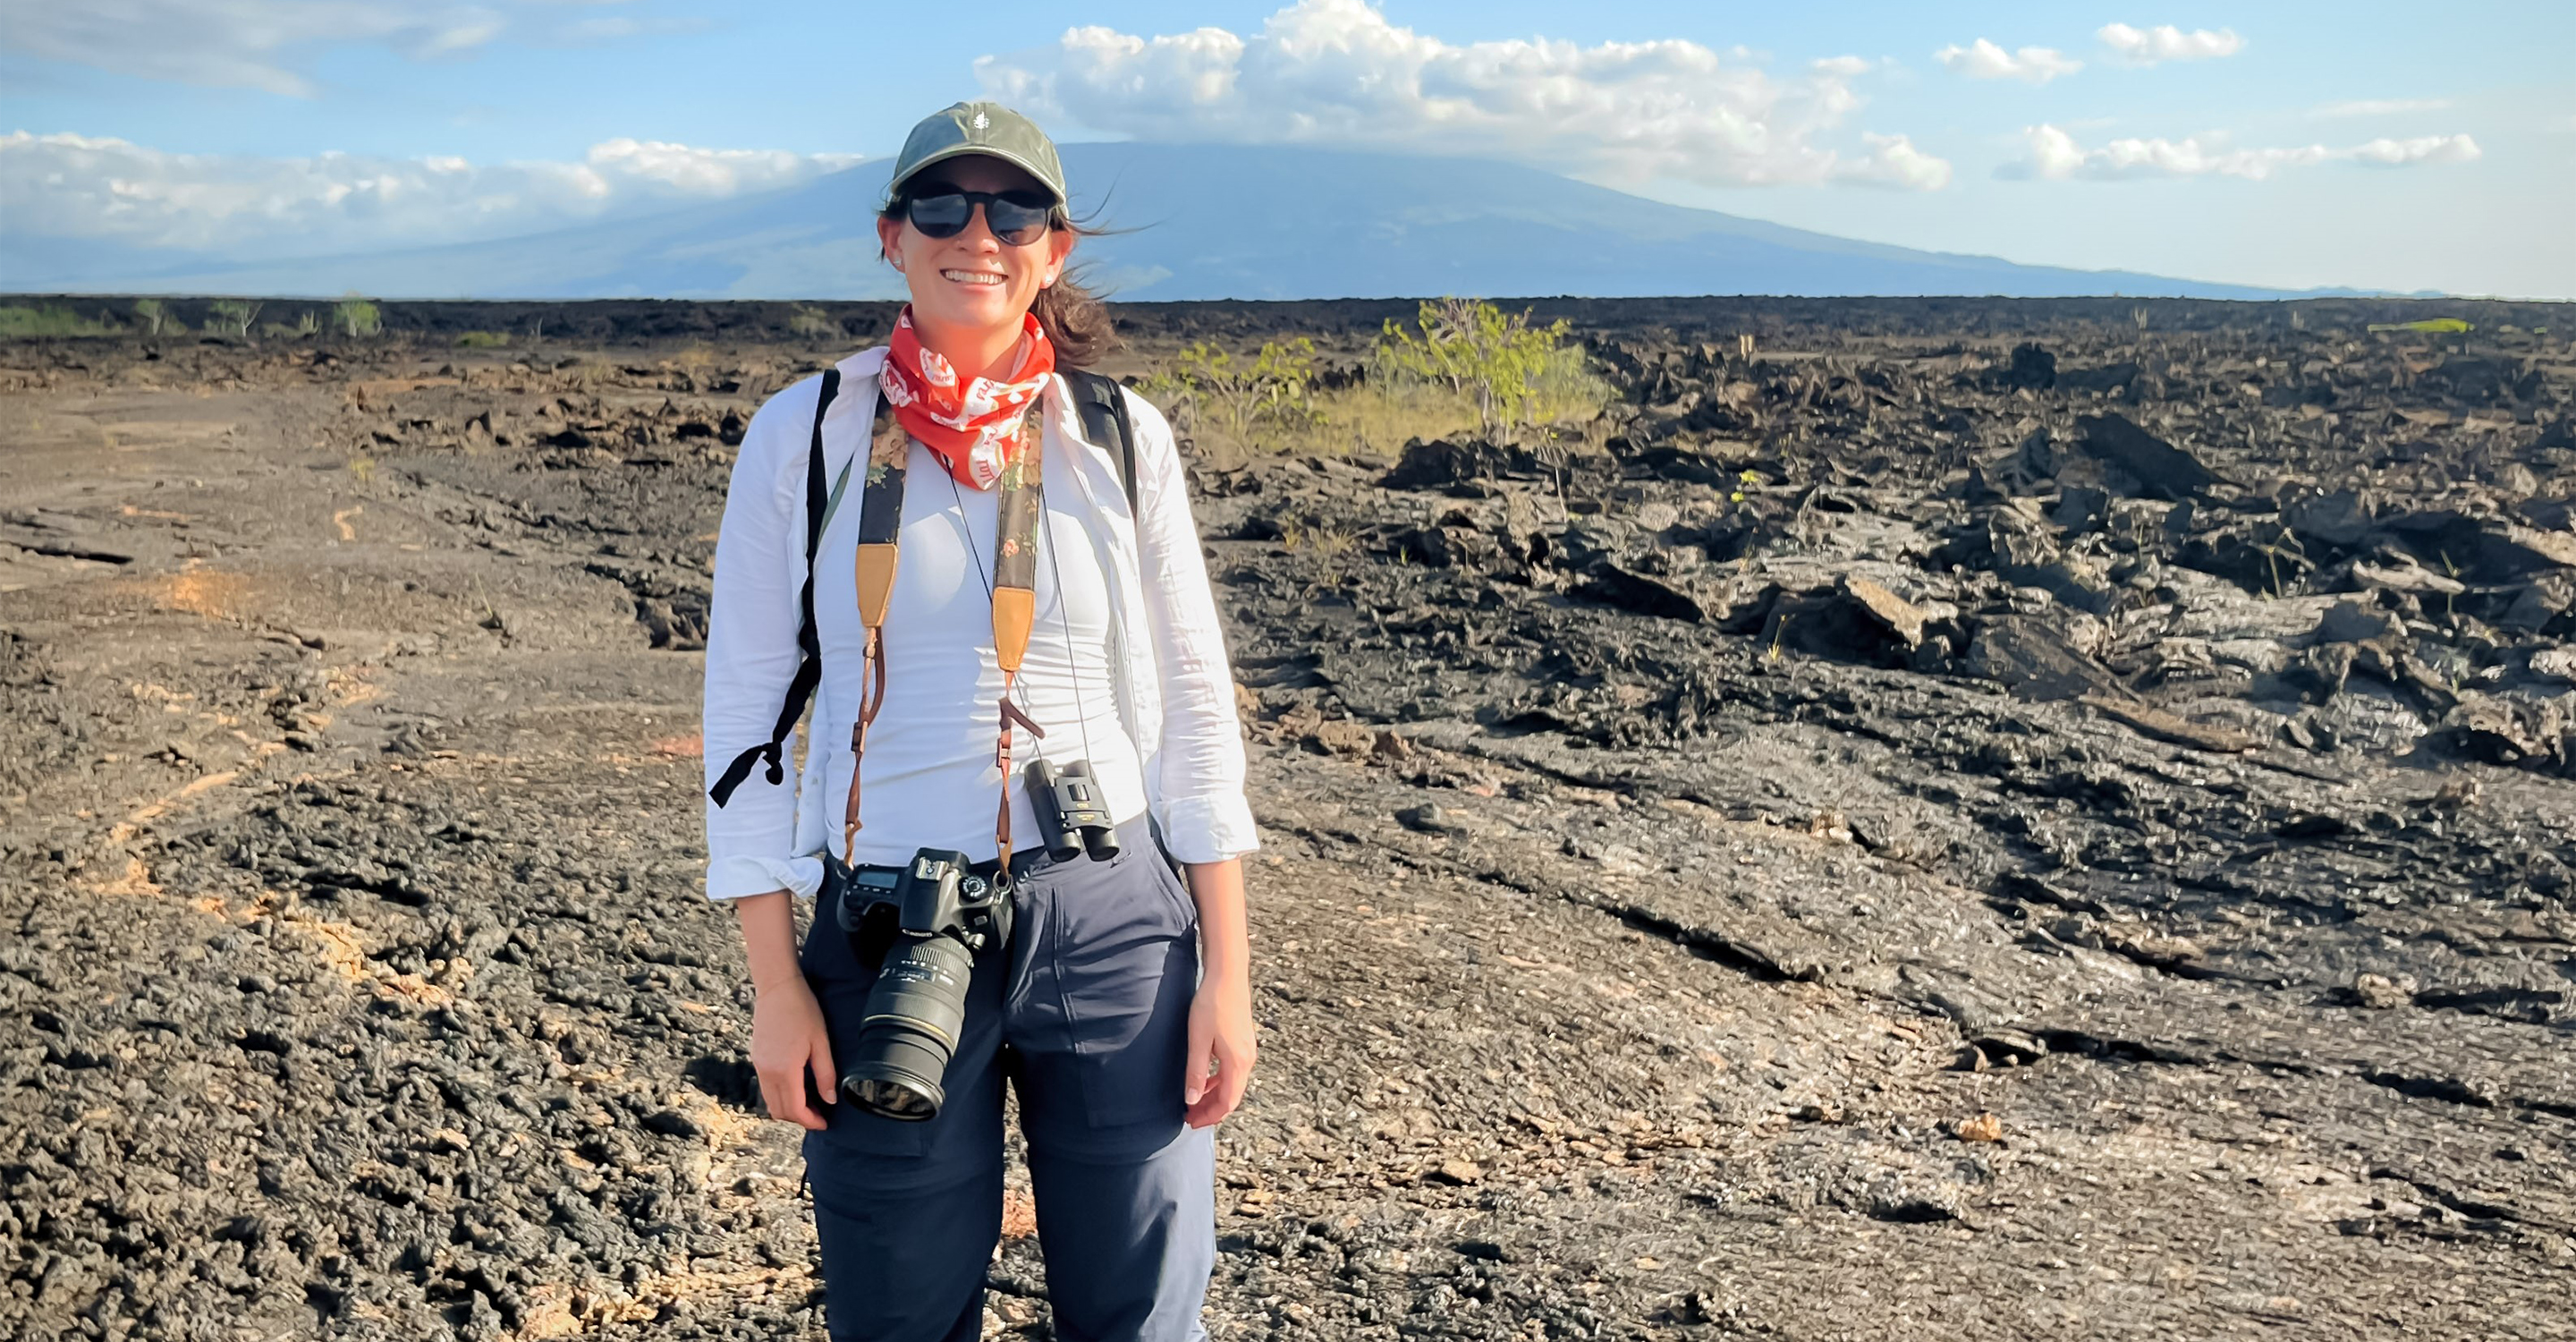 Exploring expansive lava fields in the Galapagos Islands.